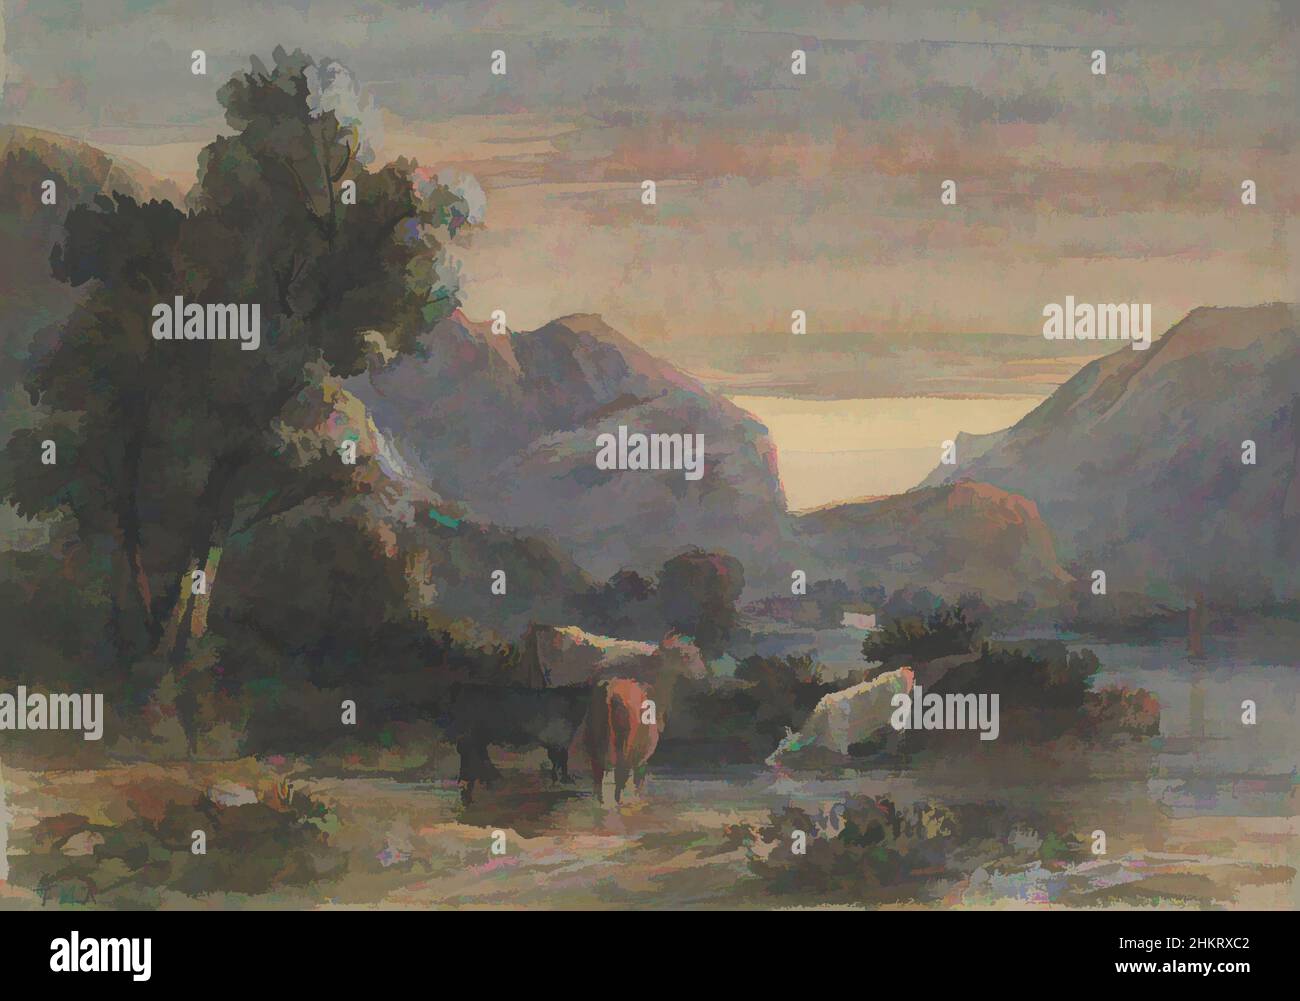 Art inspired by Landscape with cattle, Thomas Richardson, England, Classic works modernized by Artotop with a splash of modernity. Shapes, color and value, eye-catching visual impact on art. Emotions through freedom of artworks in a contemporary way. A timeless message pursuing a wildly creative new direction. Artists turning to the digital medium and creating the Artotop NFT Stock Photo